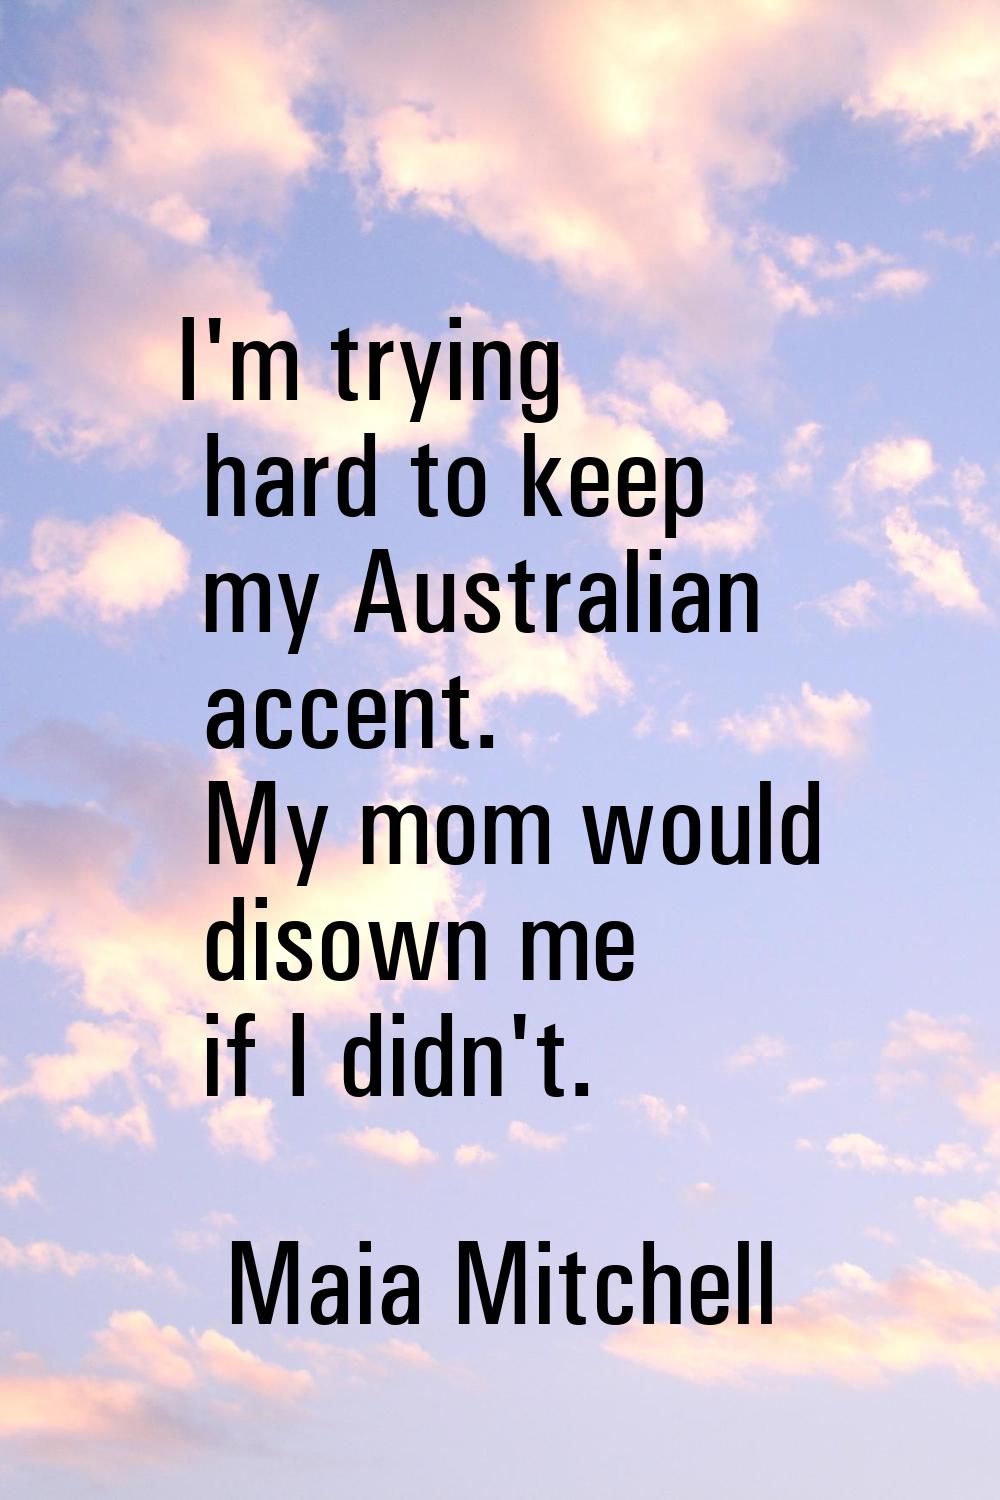 I'm trying hard to keep my Australian accent. My mom would disown me if I didn't.